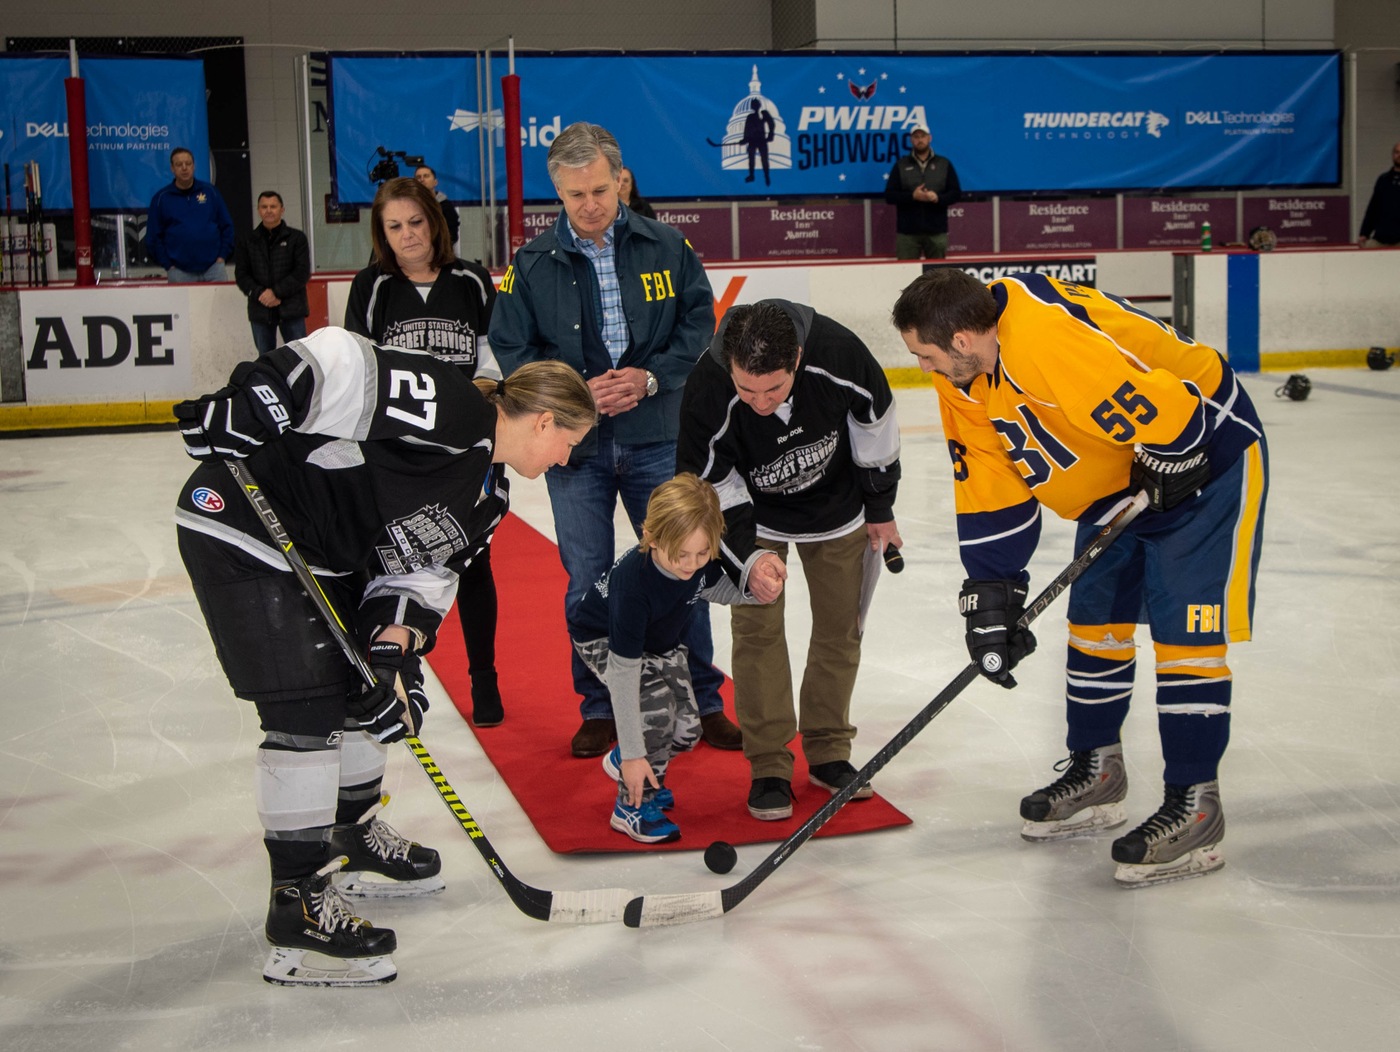 Ceremonial puck drop with Eli Alfin, Director Wray, USSS Director Cheatle, and Elliot Segal